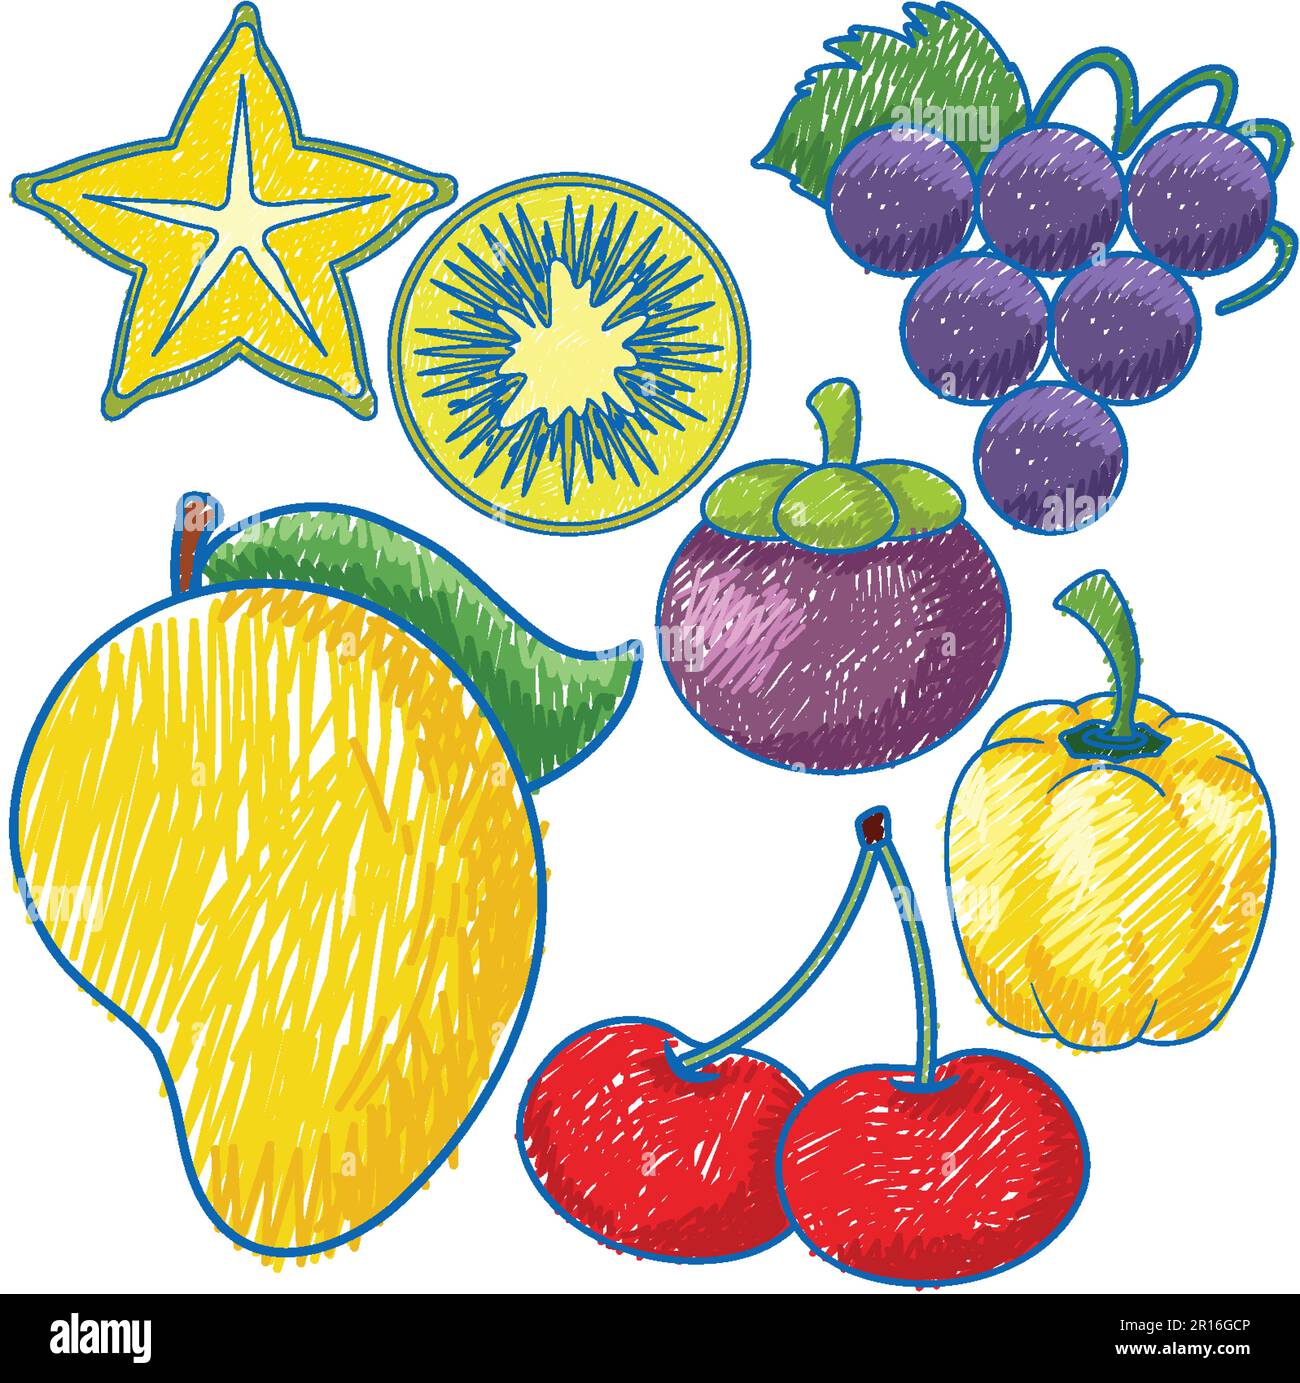 Multilingual Printables: Fruits and Vegetables in 7 Languages